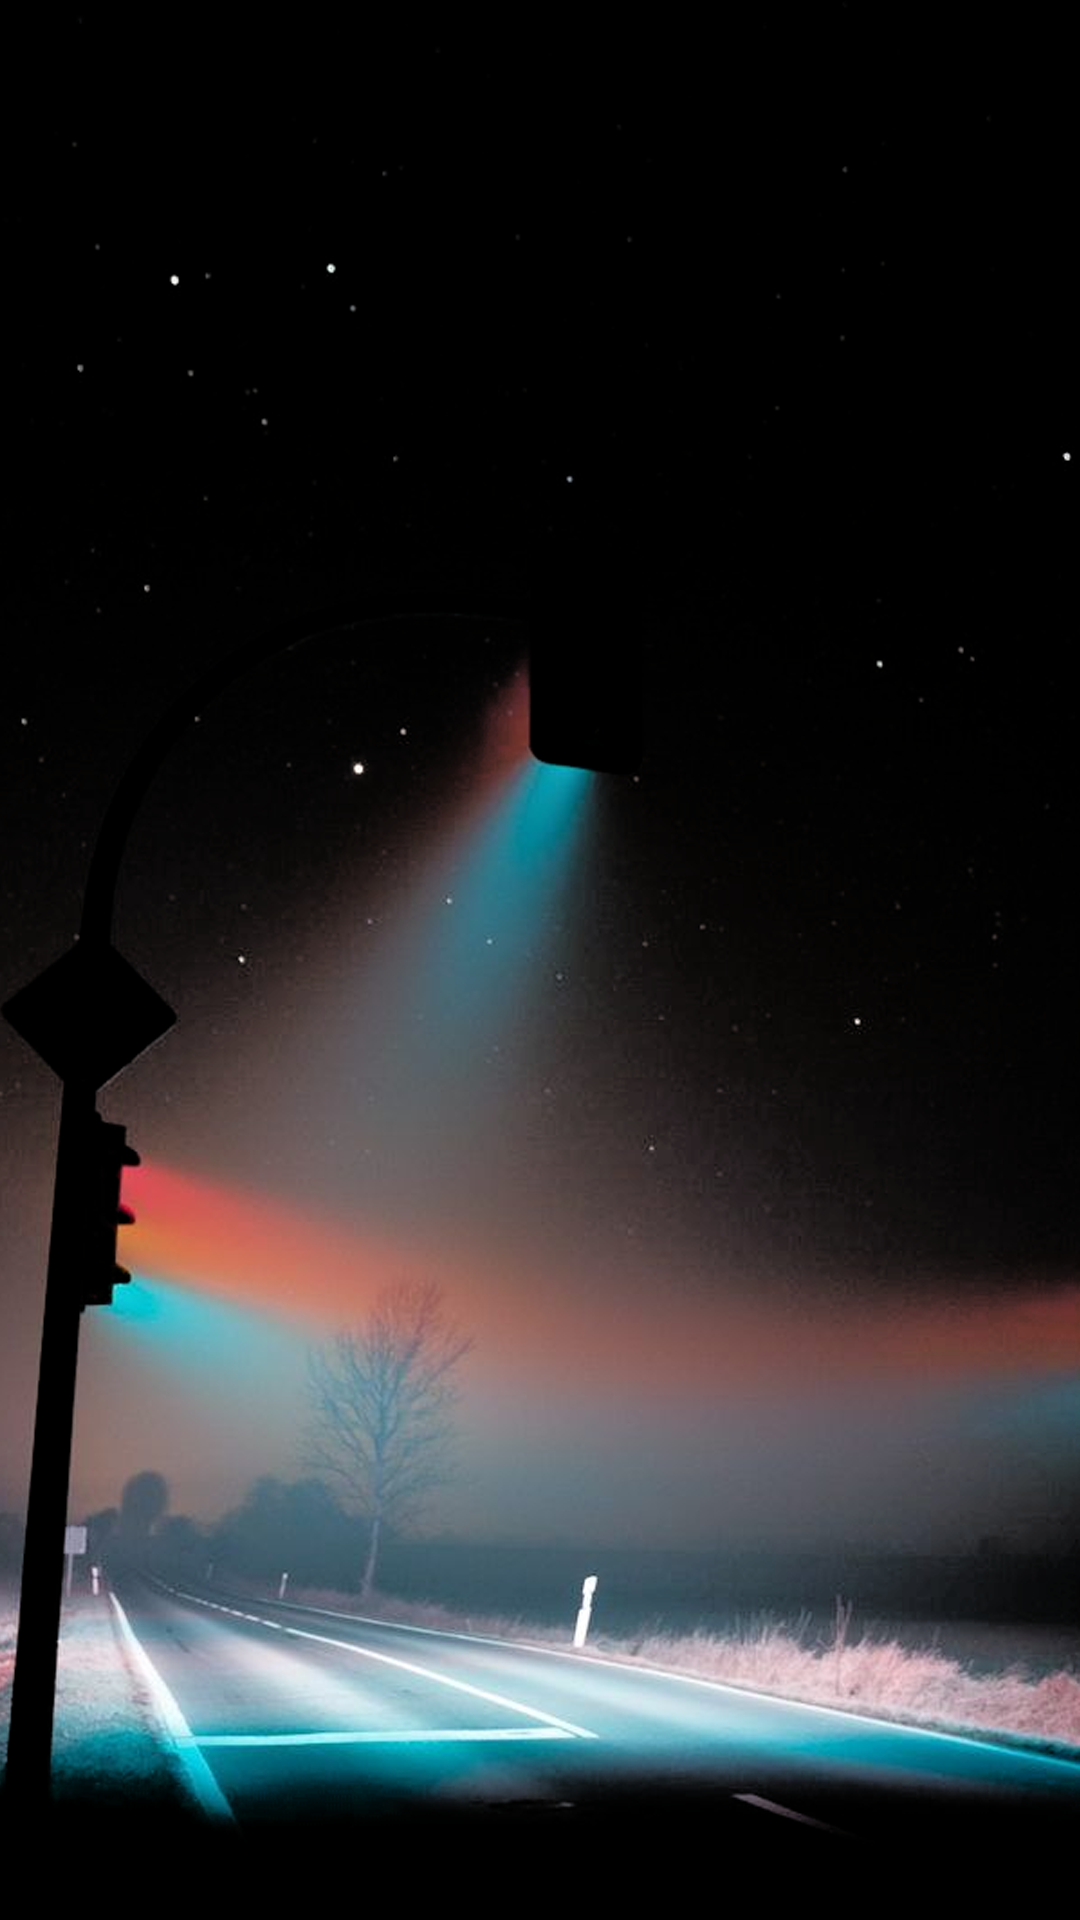 Inspired By This Photo Showing Up Regularly On Reddit, I Present The Long Exposure Traffic Lights Wallpaper! [1080x1920]